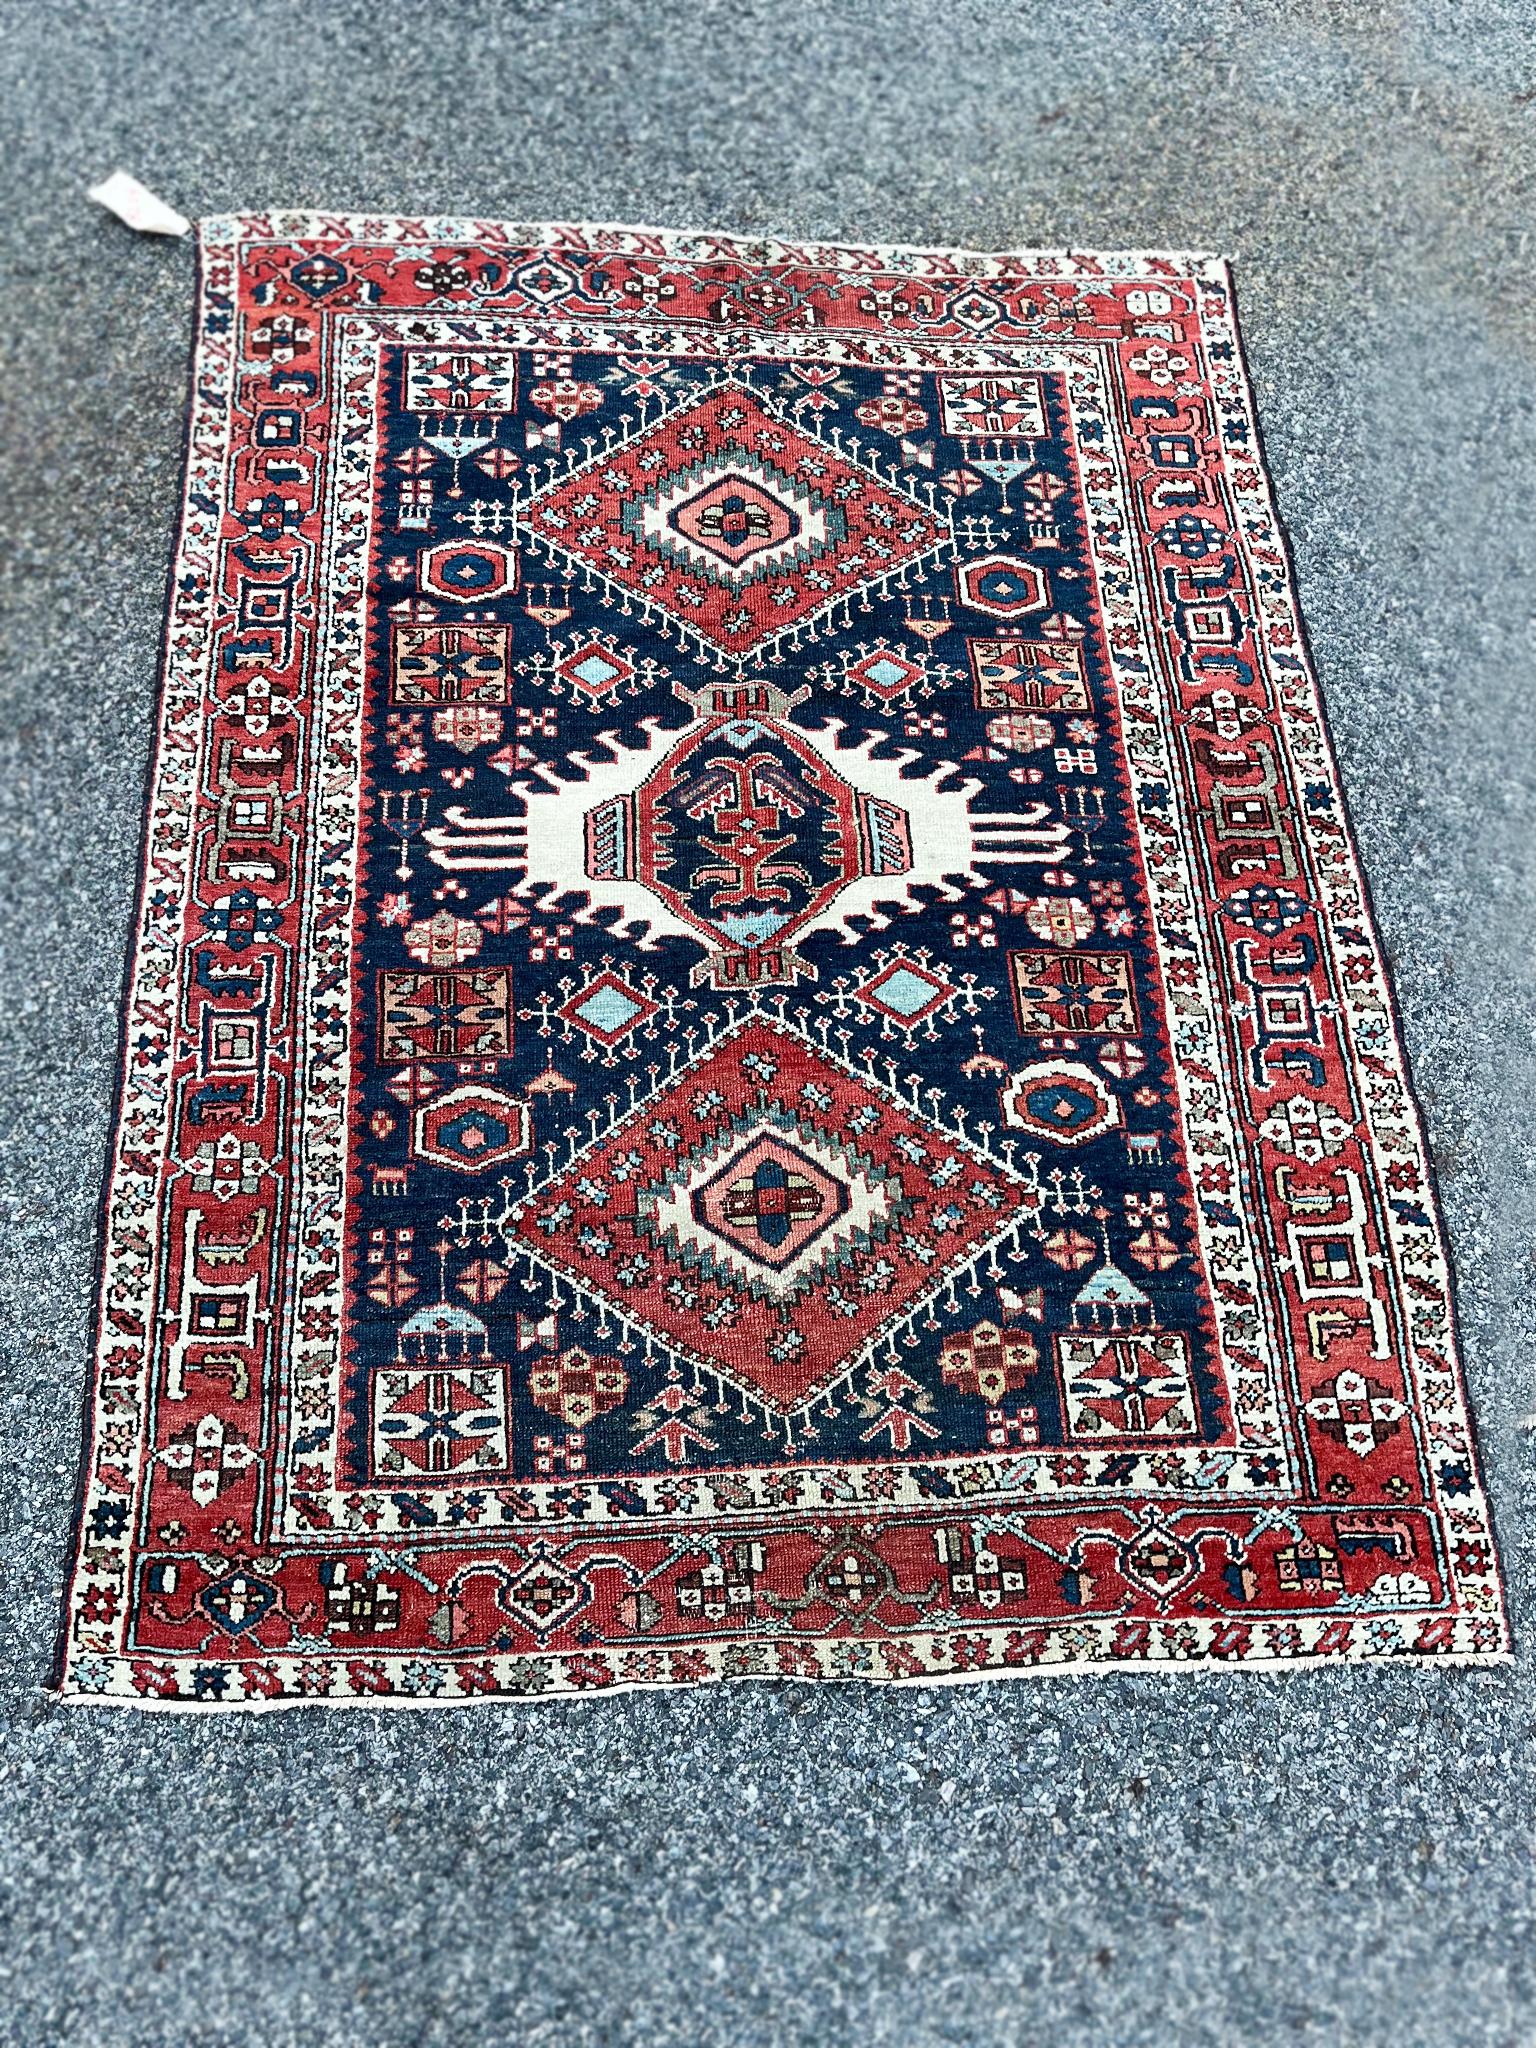 This Bibikabad rug was made in the early 20th century. It has a rich palette of red, blue, and ivory. The design features a central column of medallions floating in a blue field surrounded by floral, geometric forms and bounded by a series of